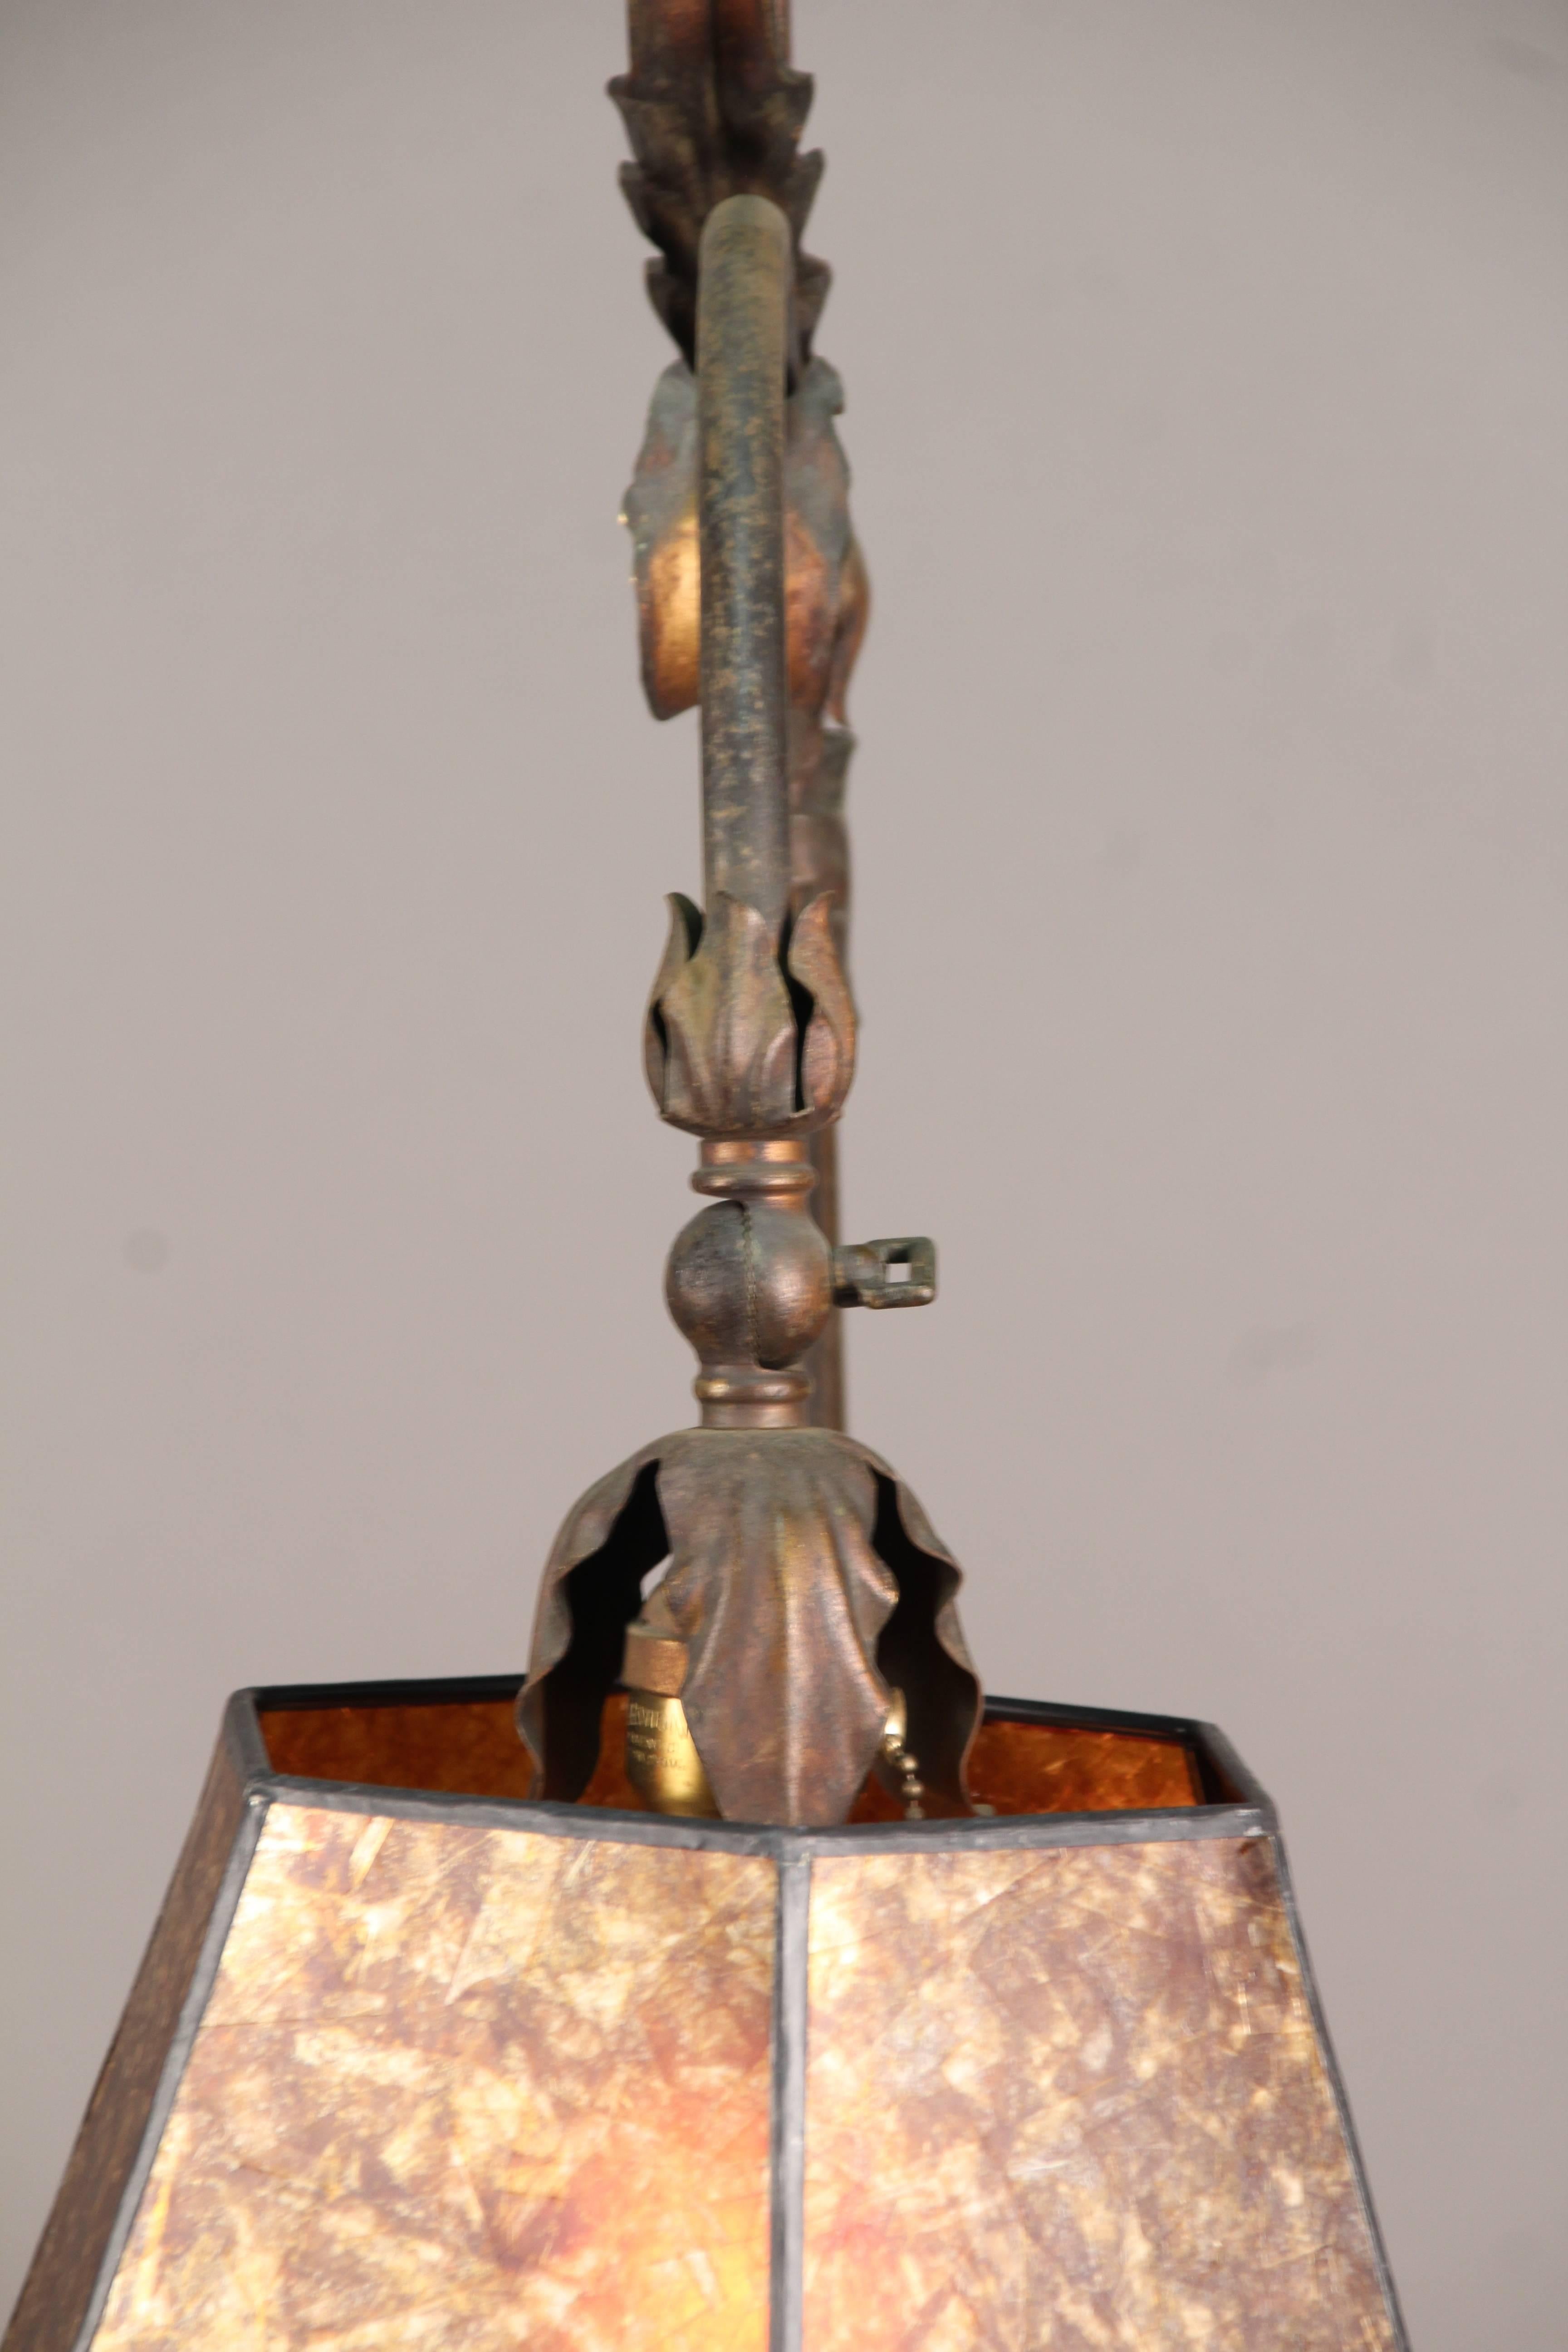 Spanish Colonial 1920s Adjustable Floor Lamp with Mica Shade